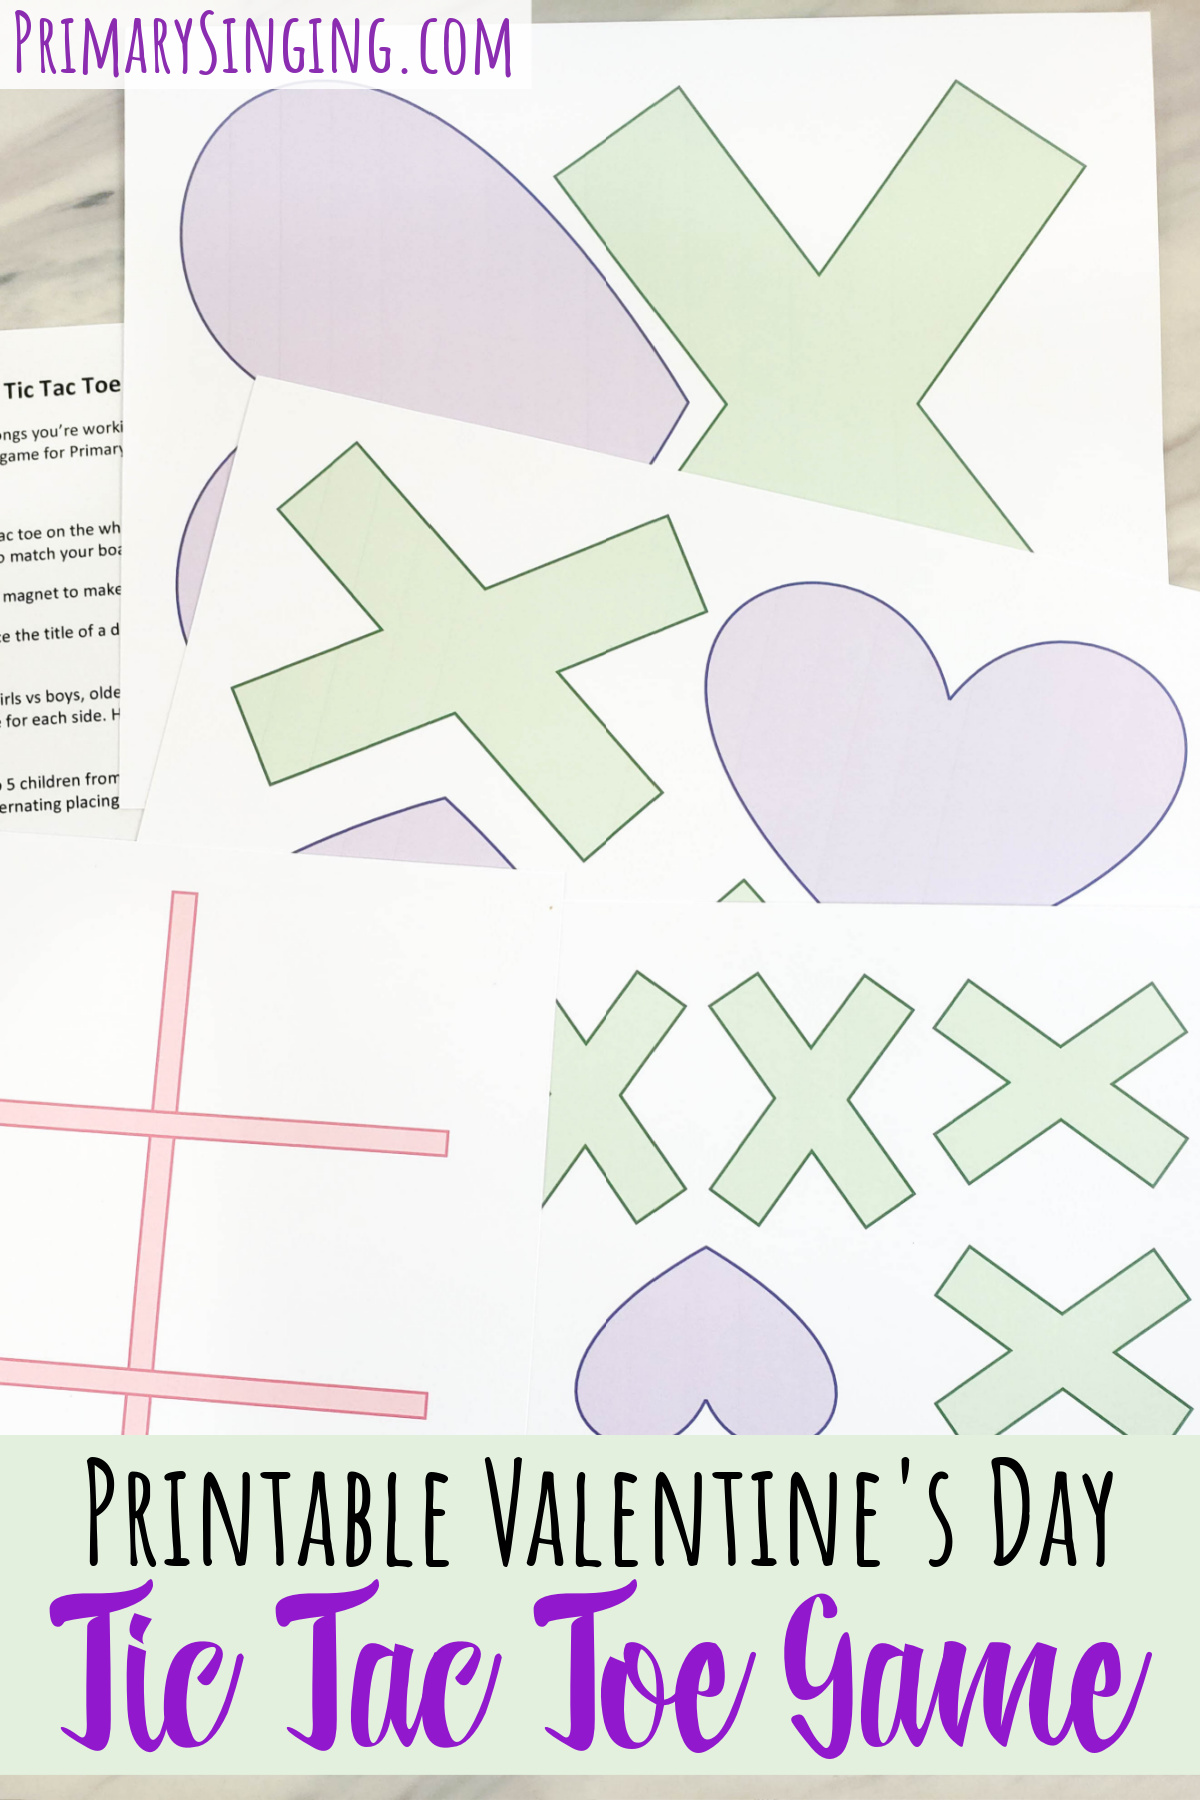 Valentine's Day tic tac toe game printable in 3 sizes - individual, medium, or large format to play with a big group or classroom! Several fun ways to play including Singing Time ideas for Primary Music Leaders!